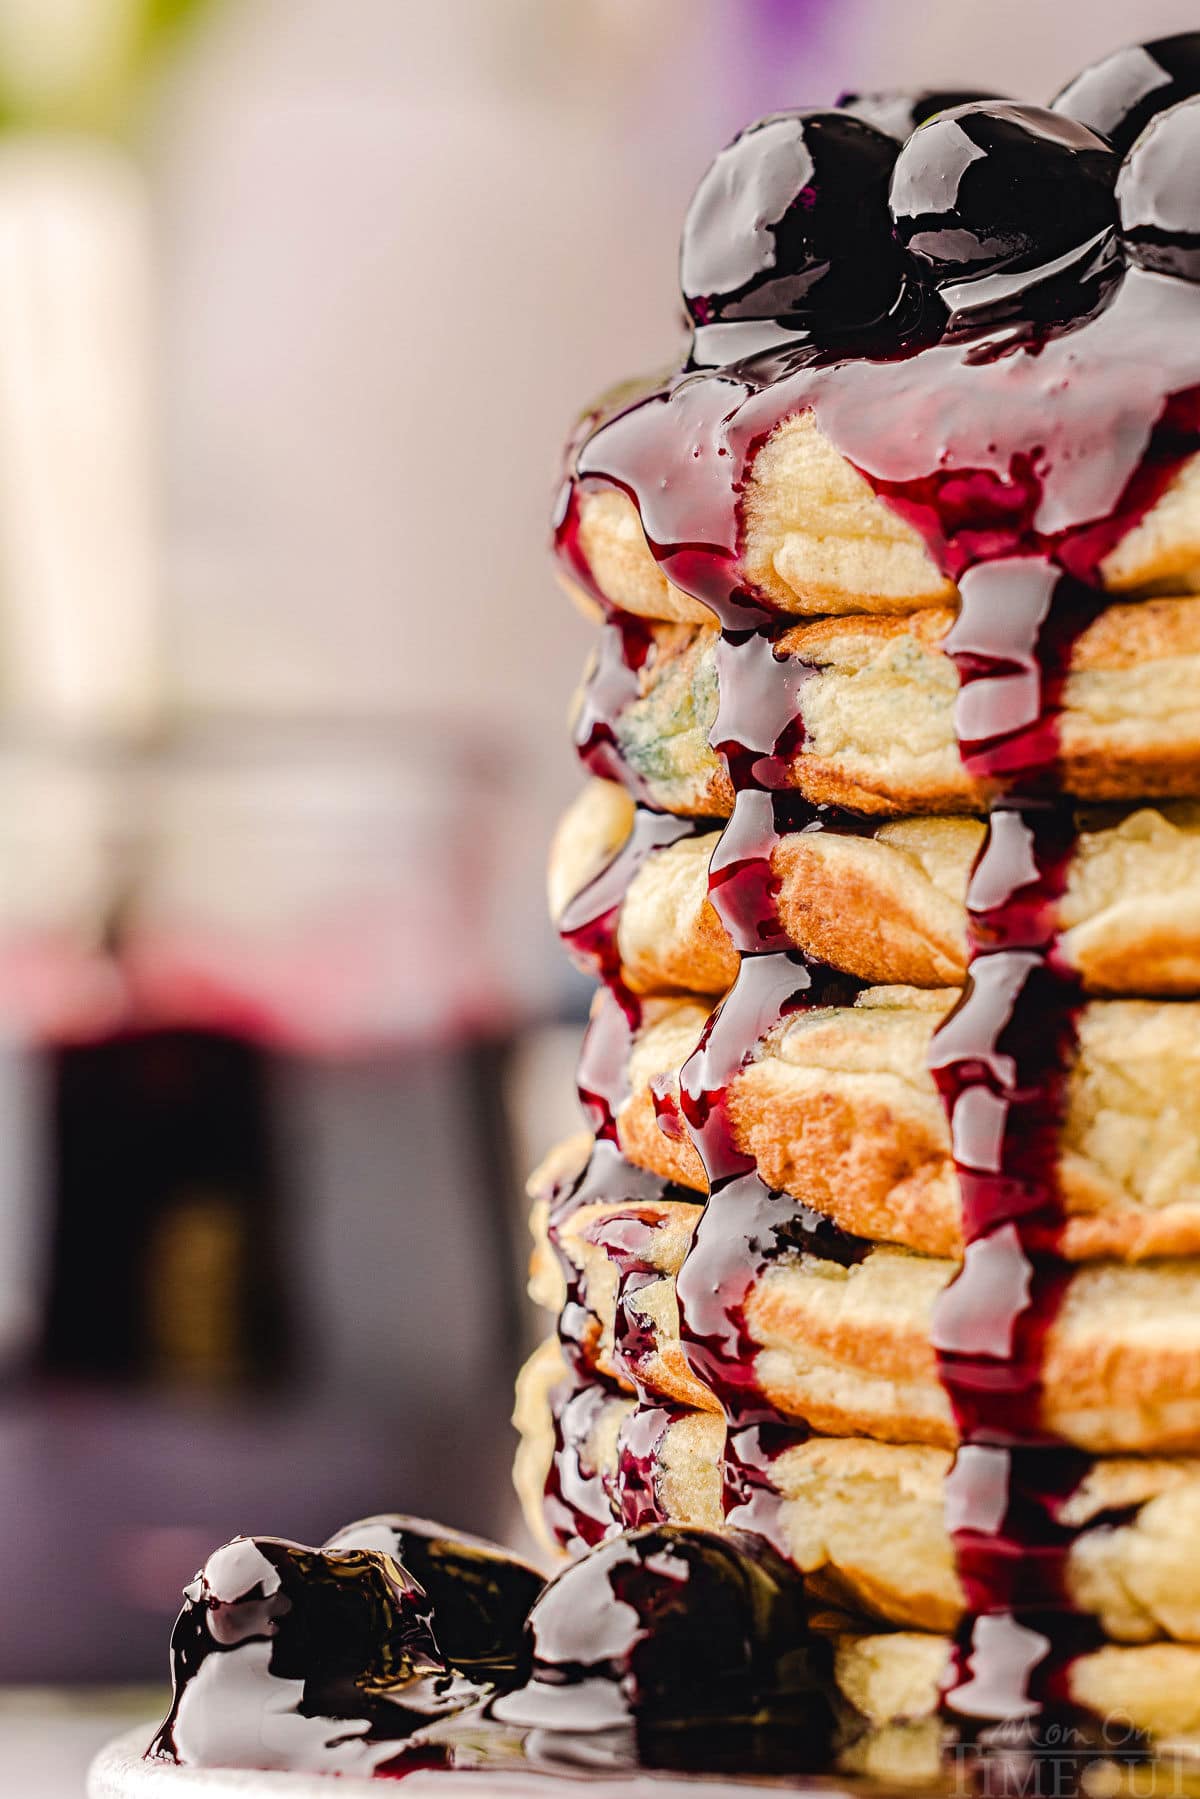 super close up look at blueberry sauce being drizzled off the side of a stack of pancakes.